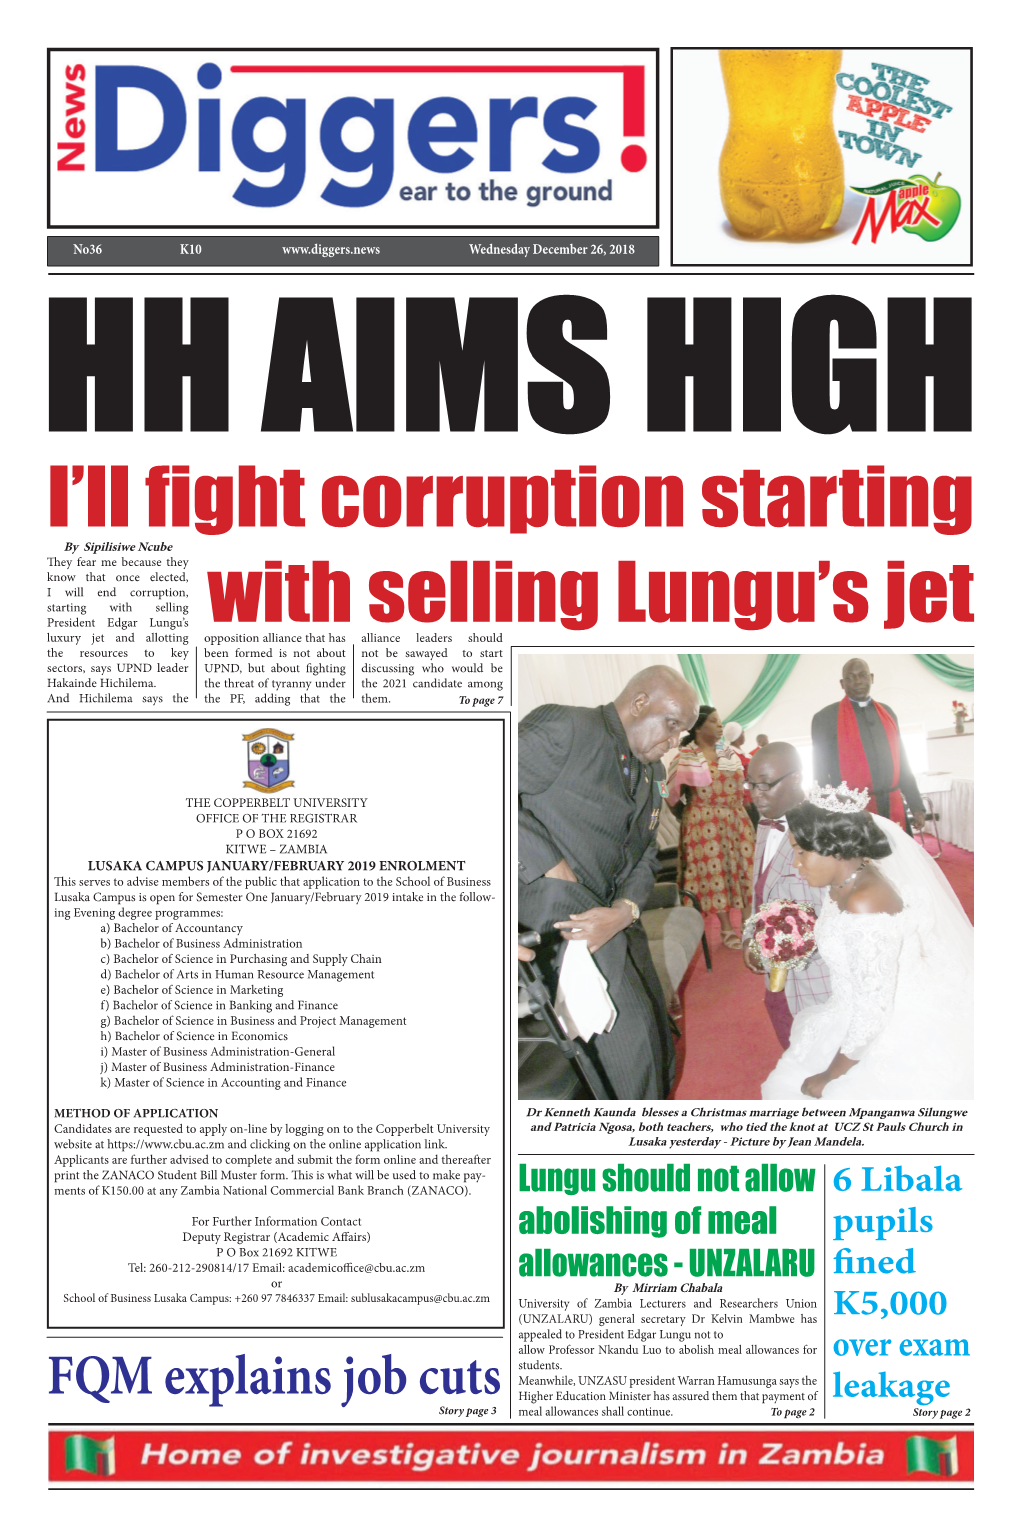 I'll Fight Corruption Starting with Selling Lungu's